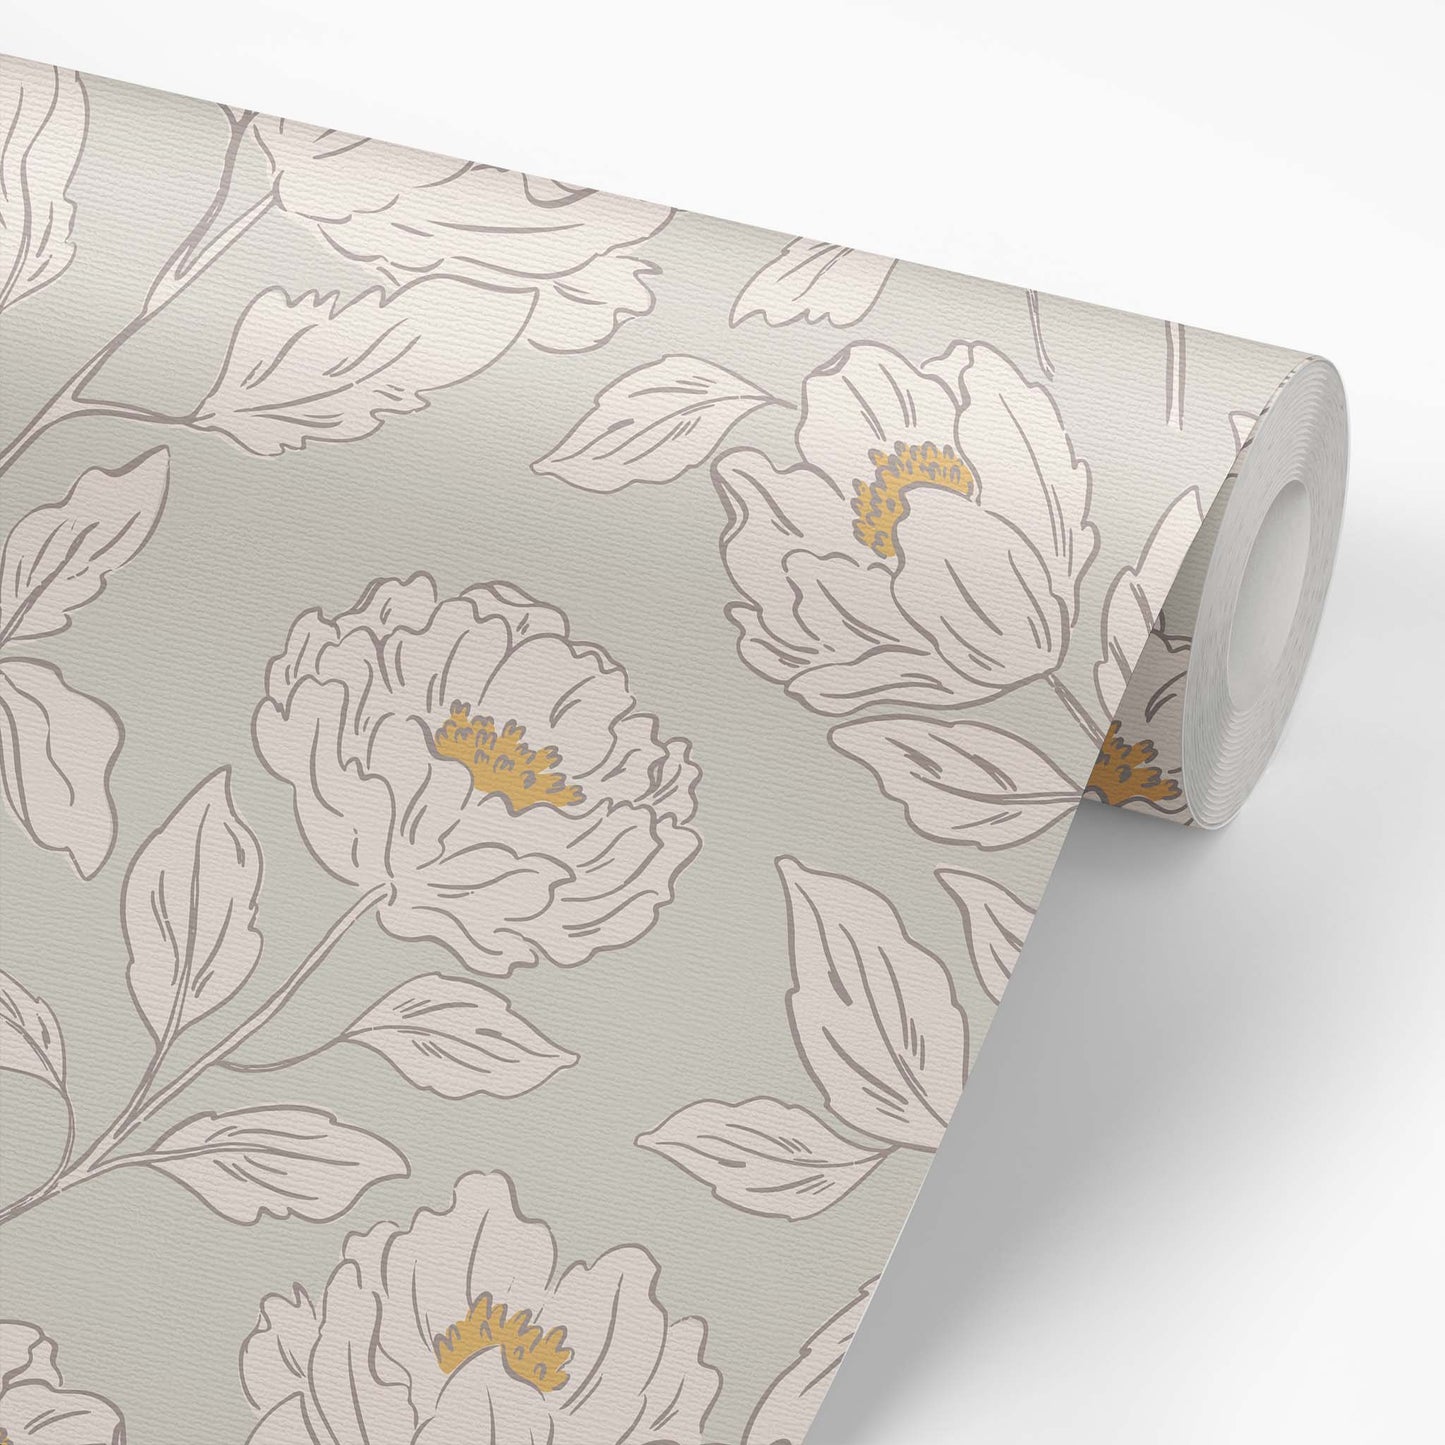 Wallpaper Roll featuring Floral Toile Peel and Stick, Removable Wallpaper in Neutral